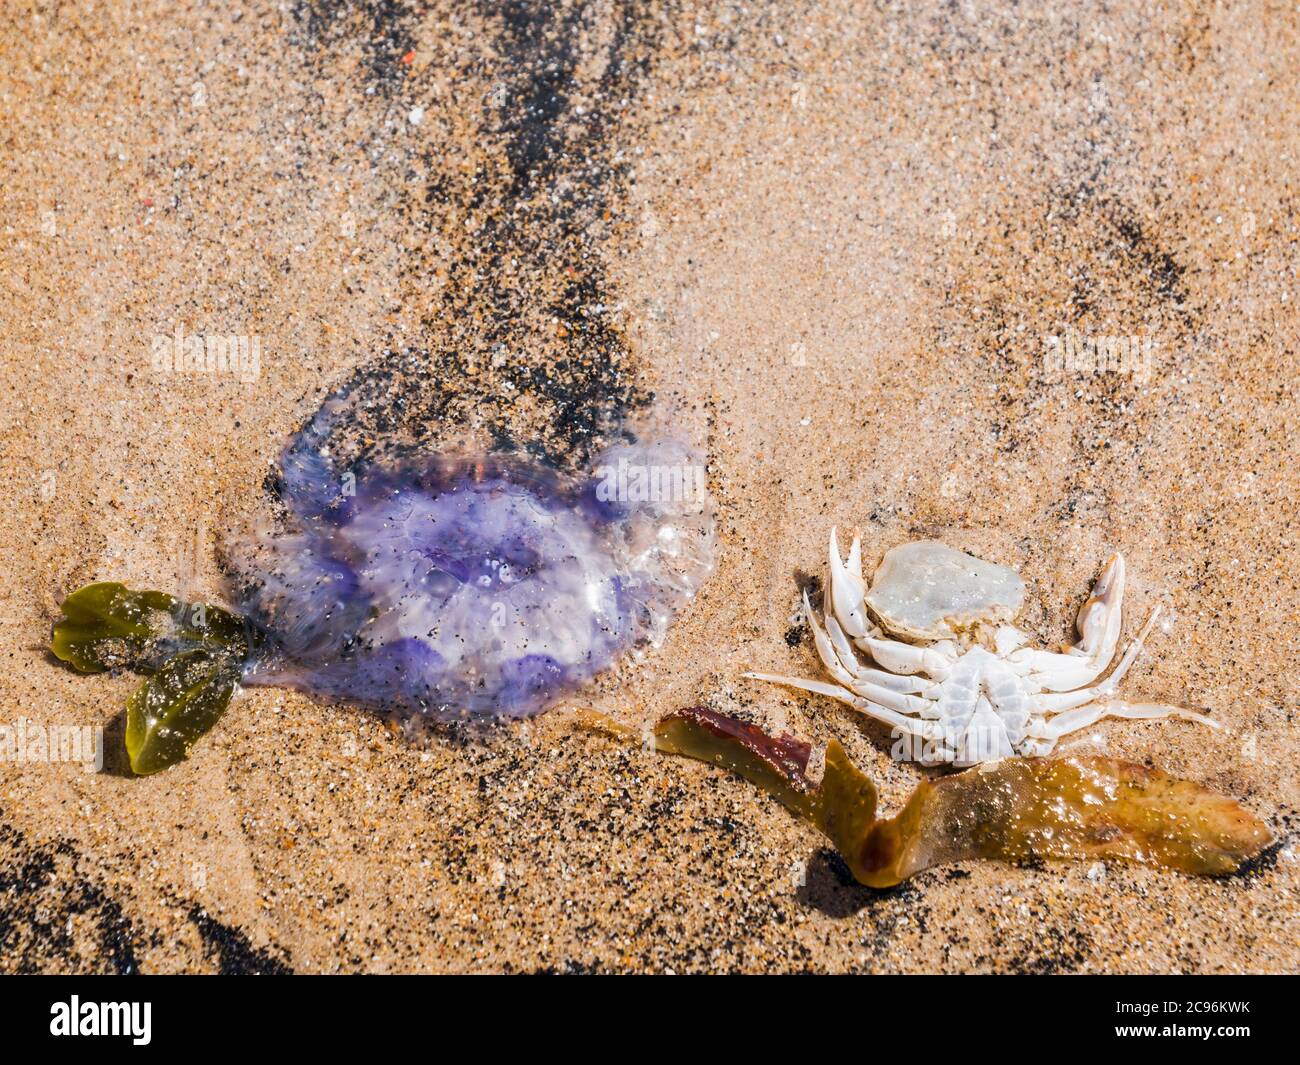 Jellyfish, Cyanea lamarckii, seaweed and a dead crab wahed up on a sandy beach. Stock Photo